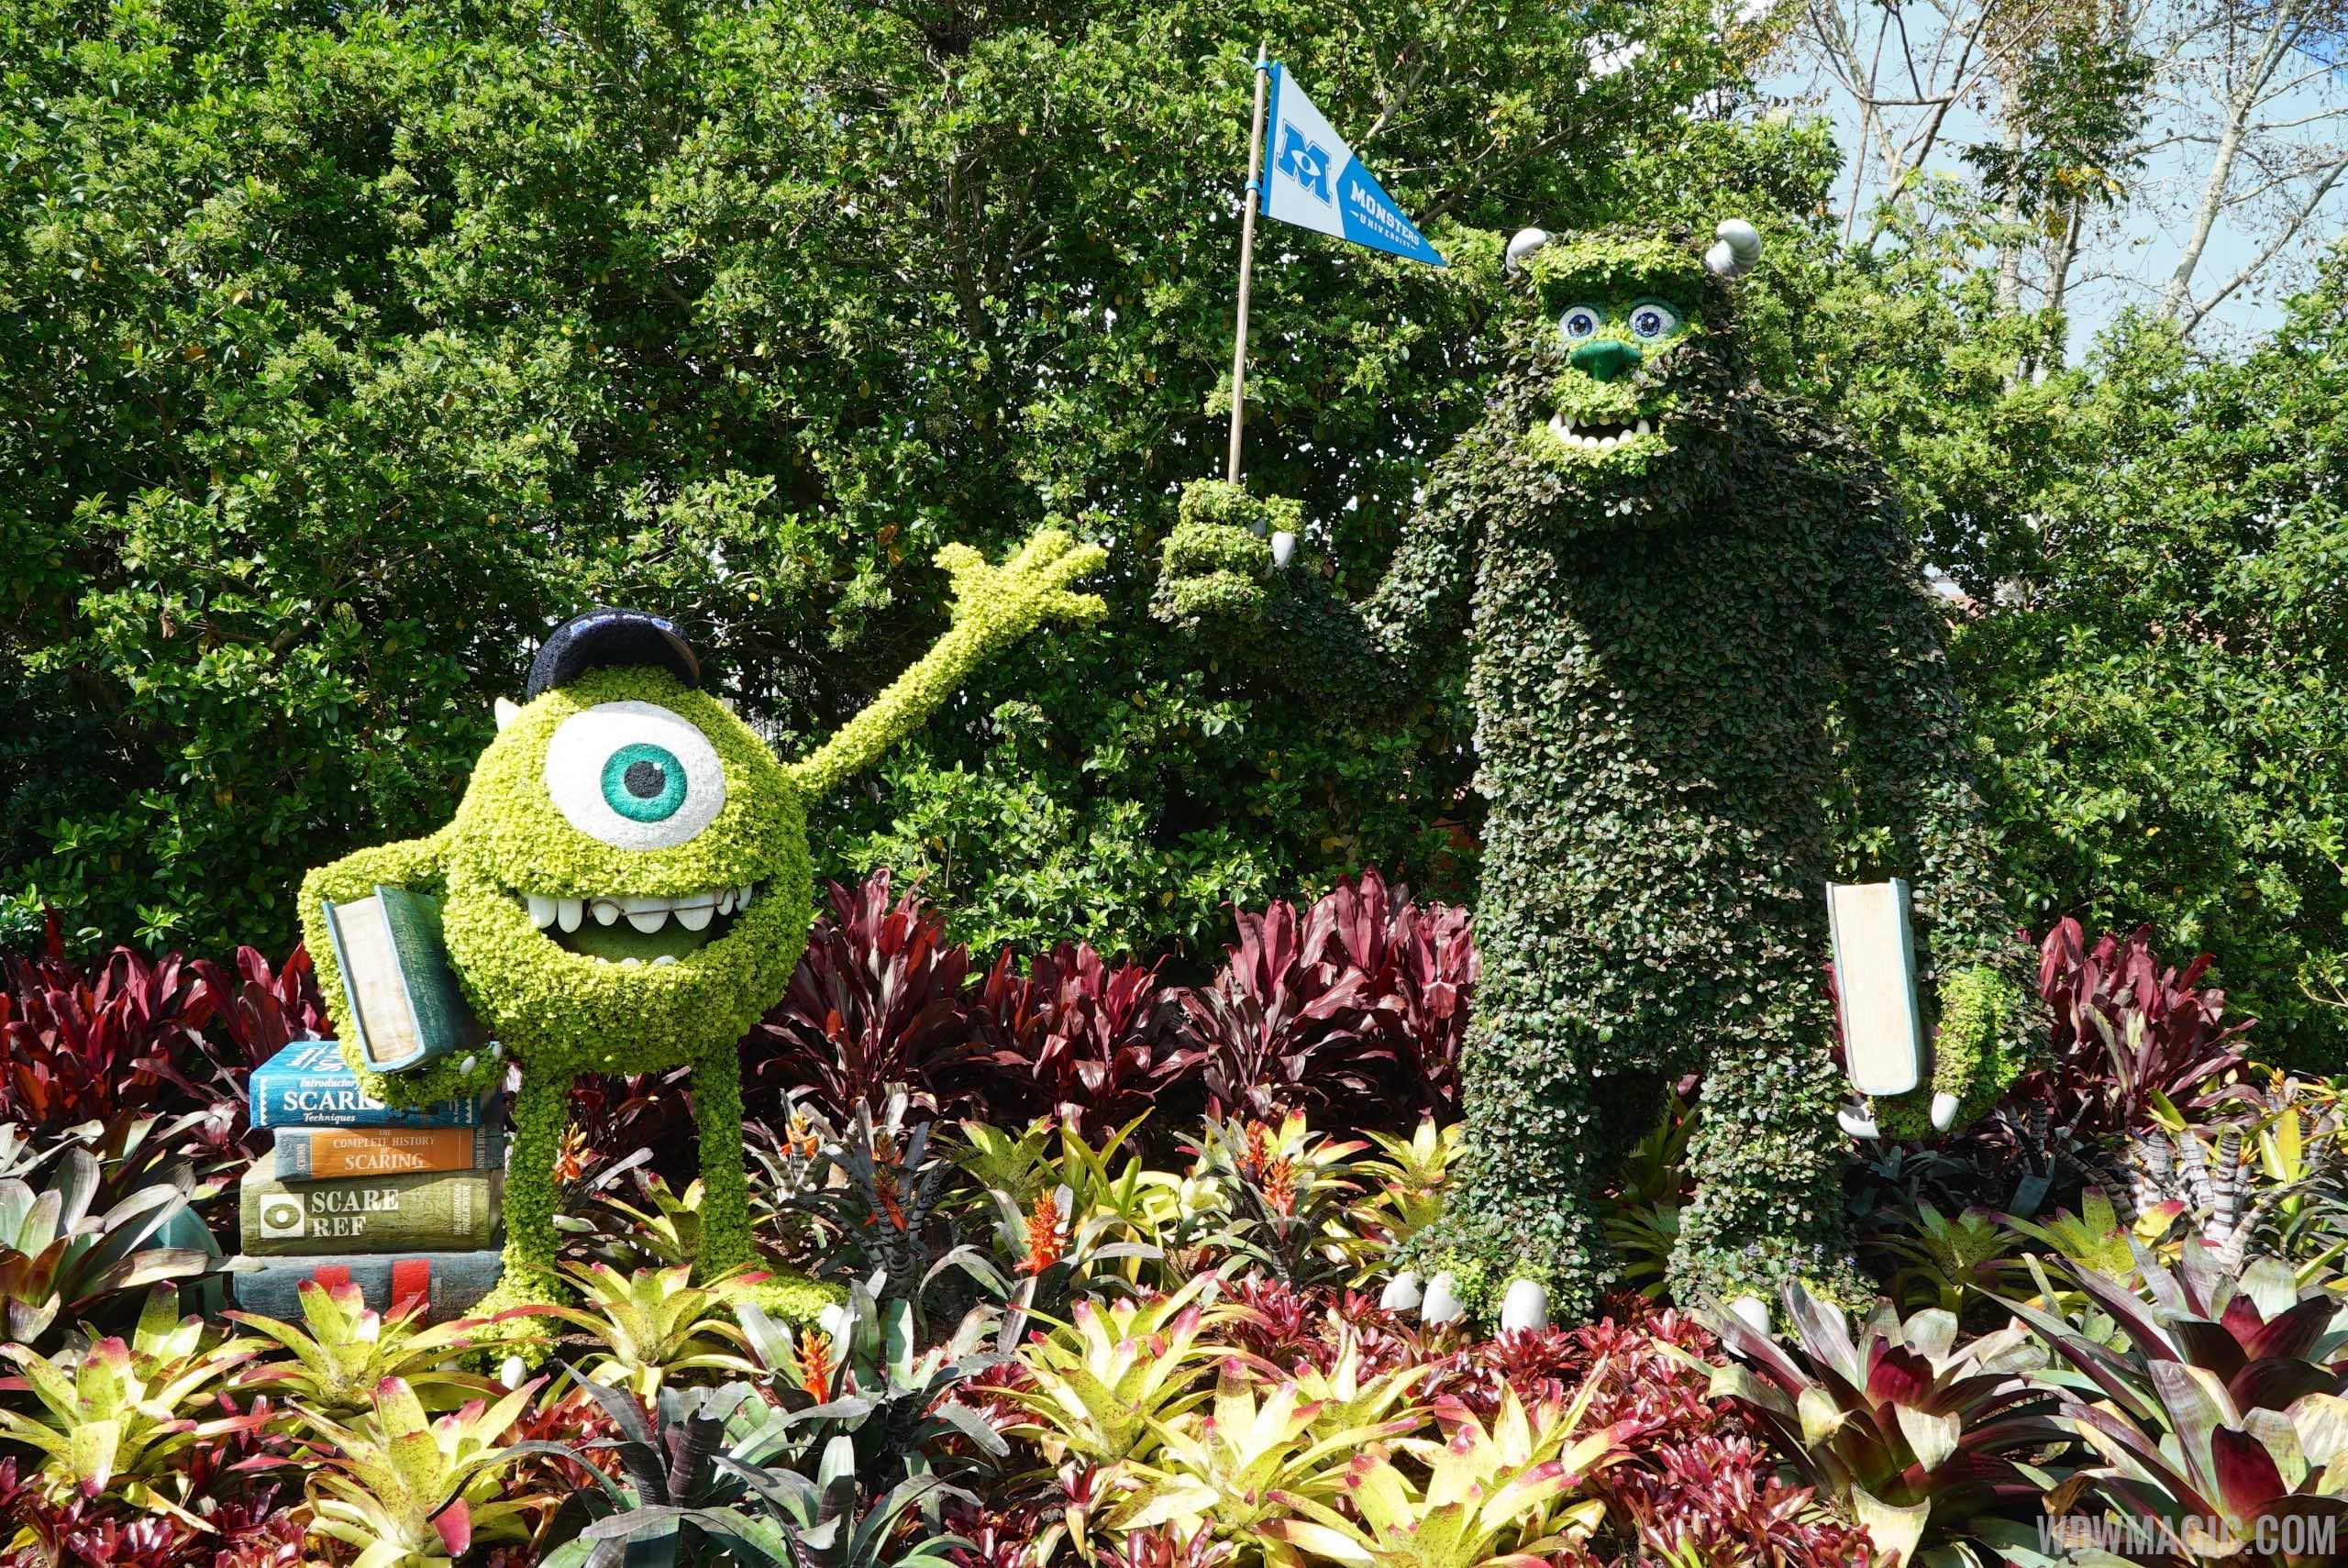 2015 Epcot Flower and Garden Festival - Monsters University topiary